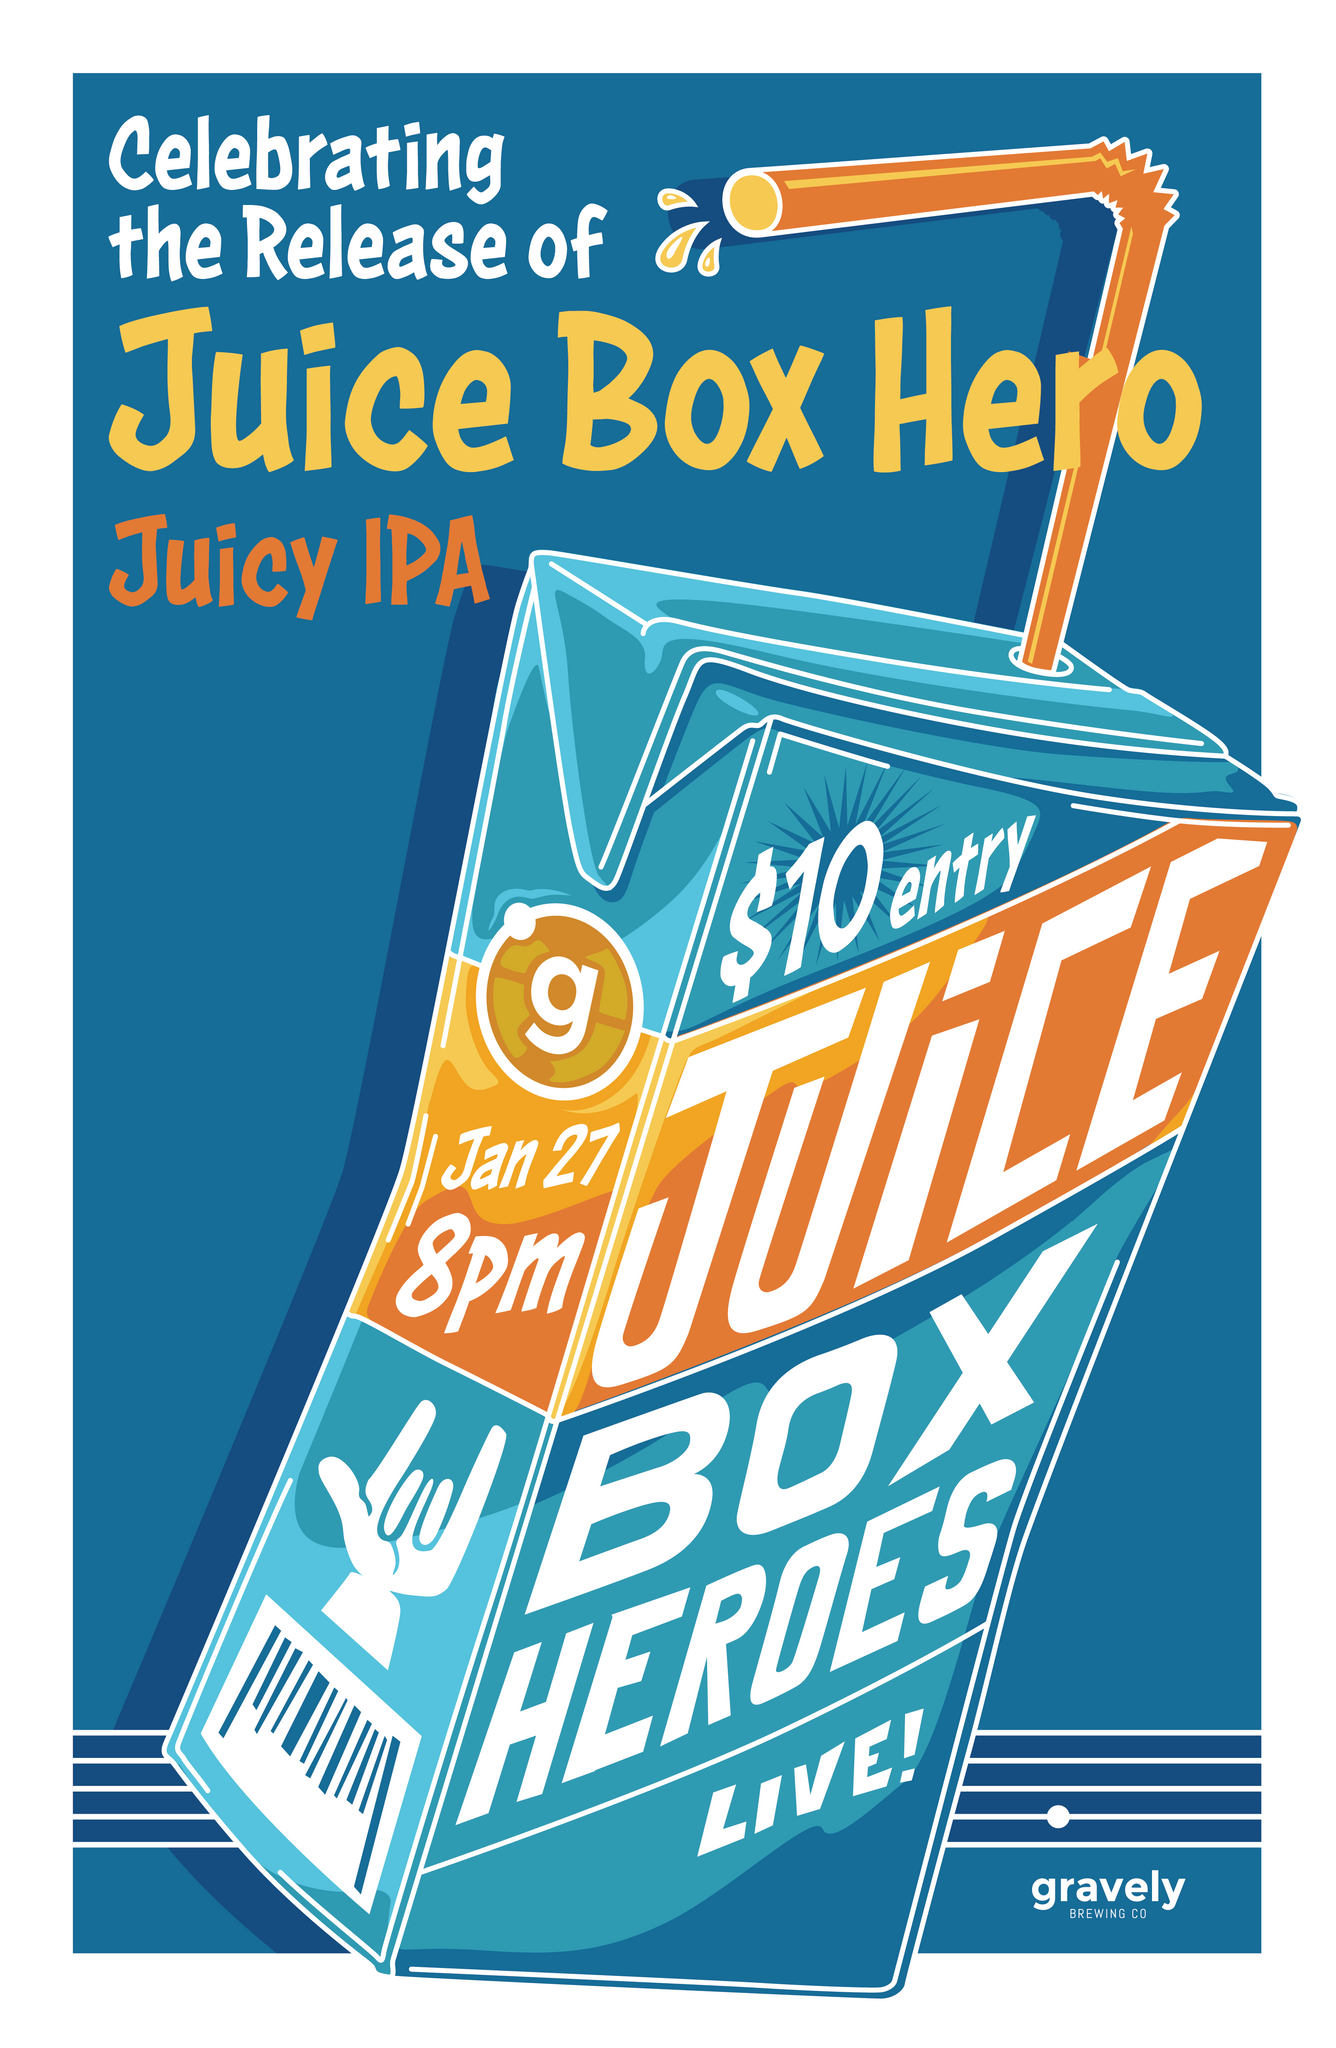 Juice Box Heroes - Live at Gravely!